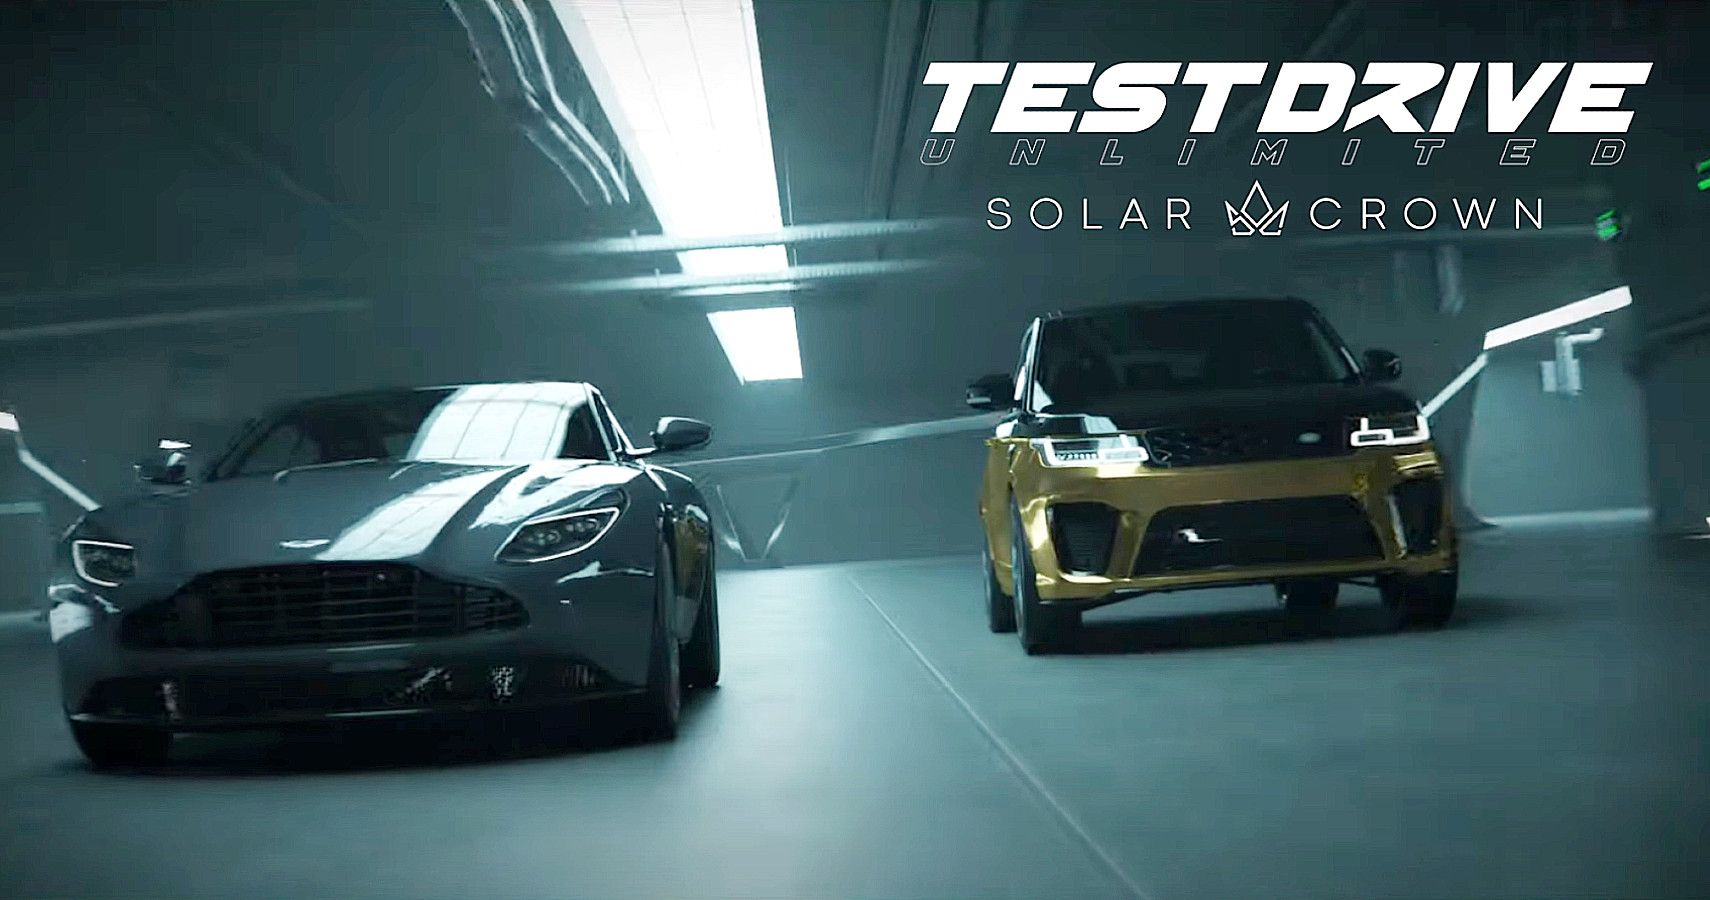 Download test drive unlimited solar crown